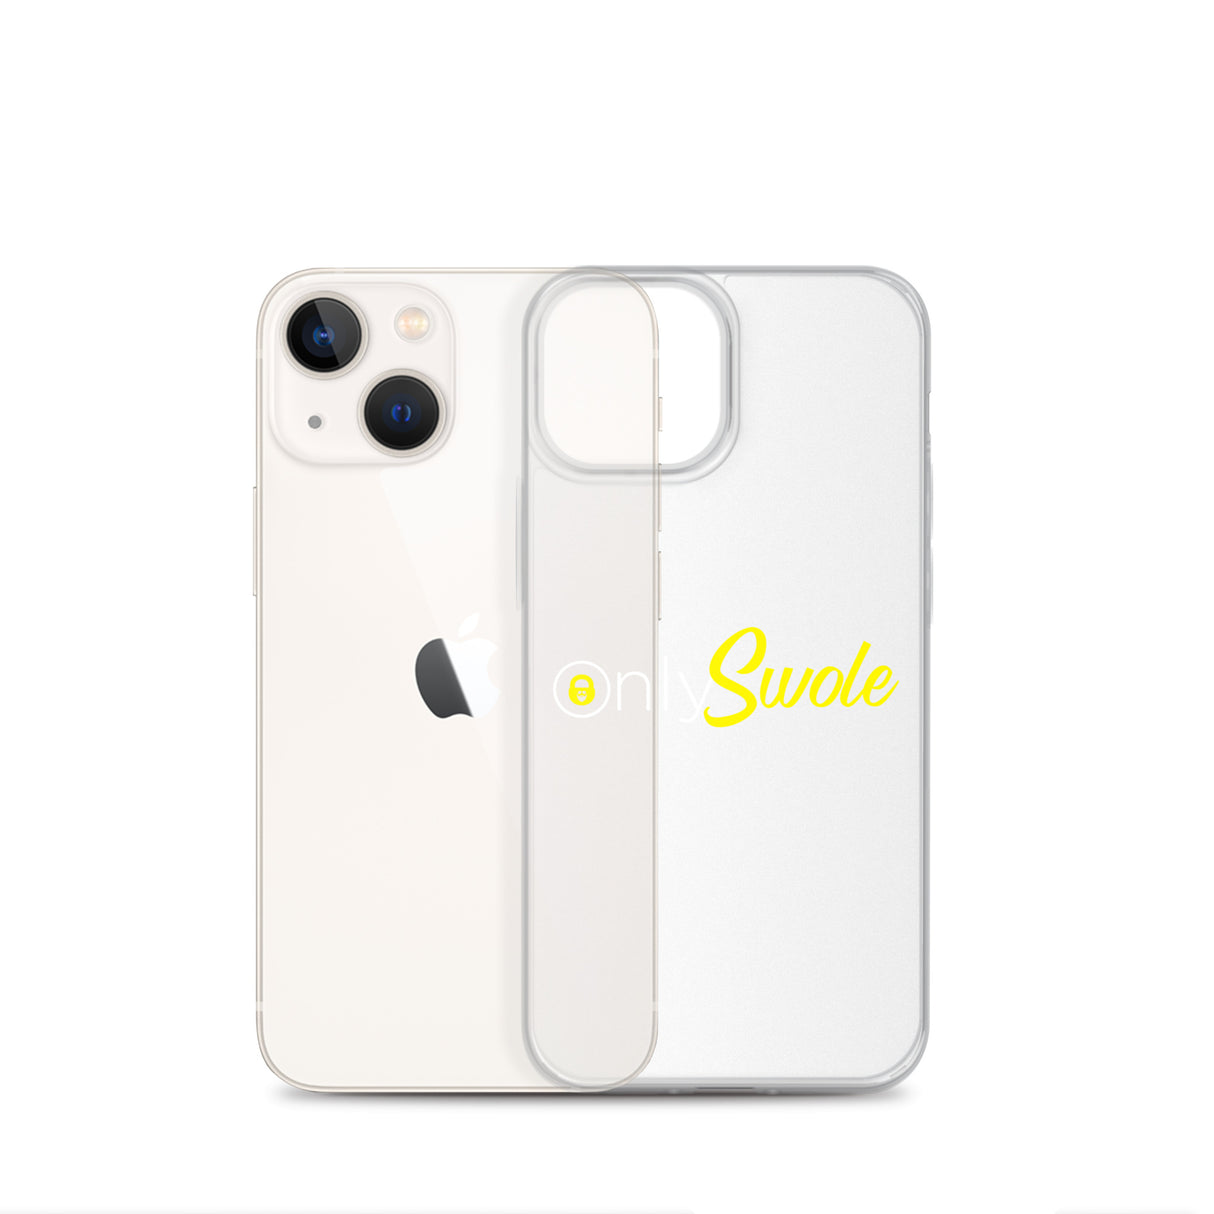 Only Swole iPhone Case